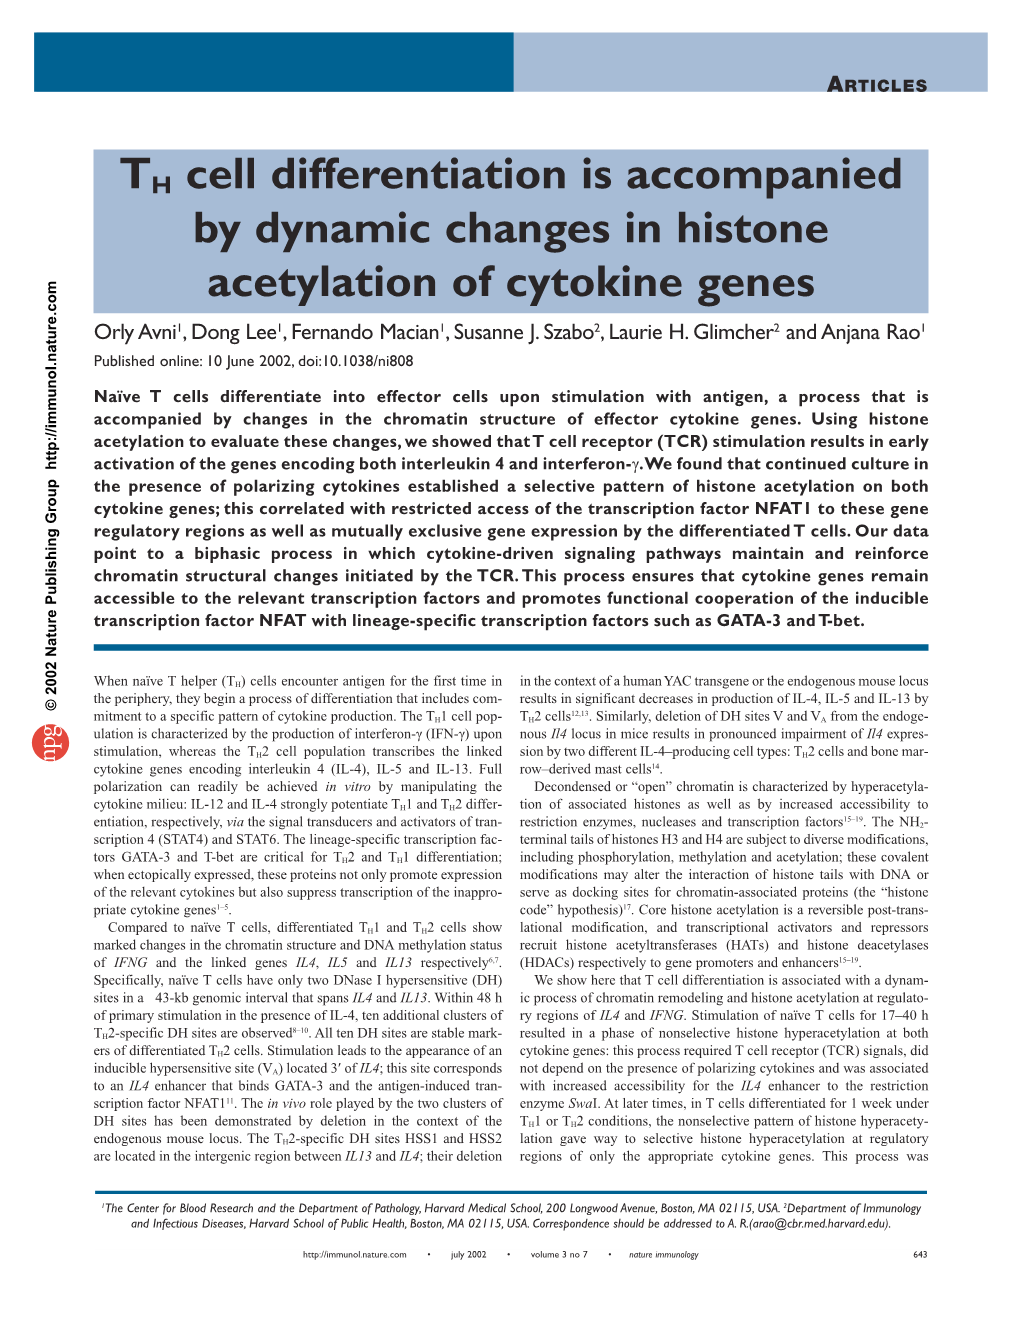 TH Cell Differentiation Is Accompanied by Dynamic Changes in Histone Acetylation of Cytokine Genes Orly Avni1, Dong Lee1,Fernando Macian1, Susanne J